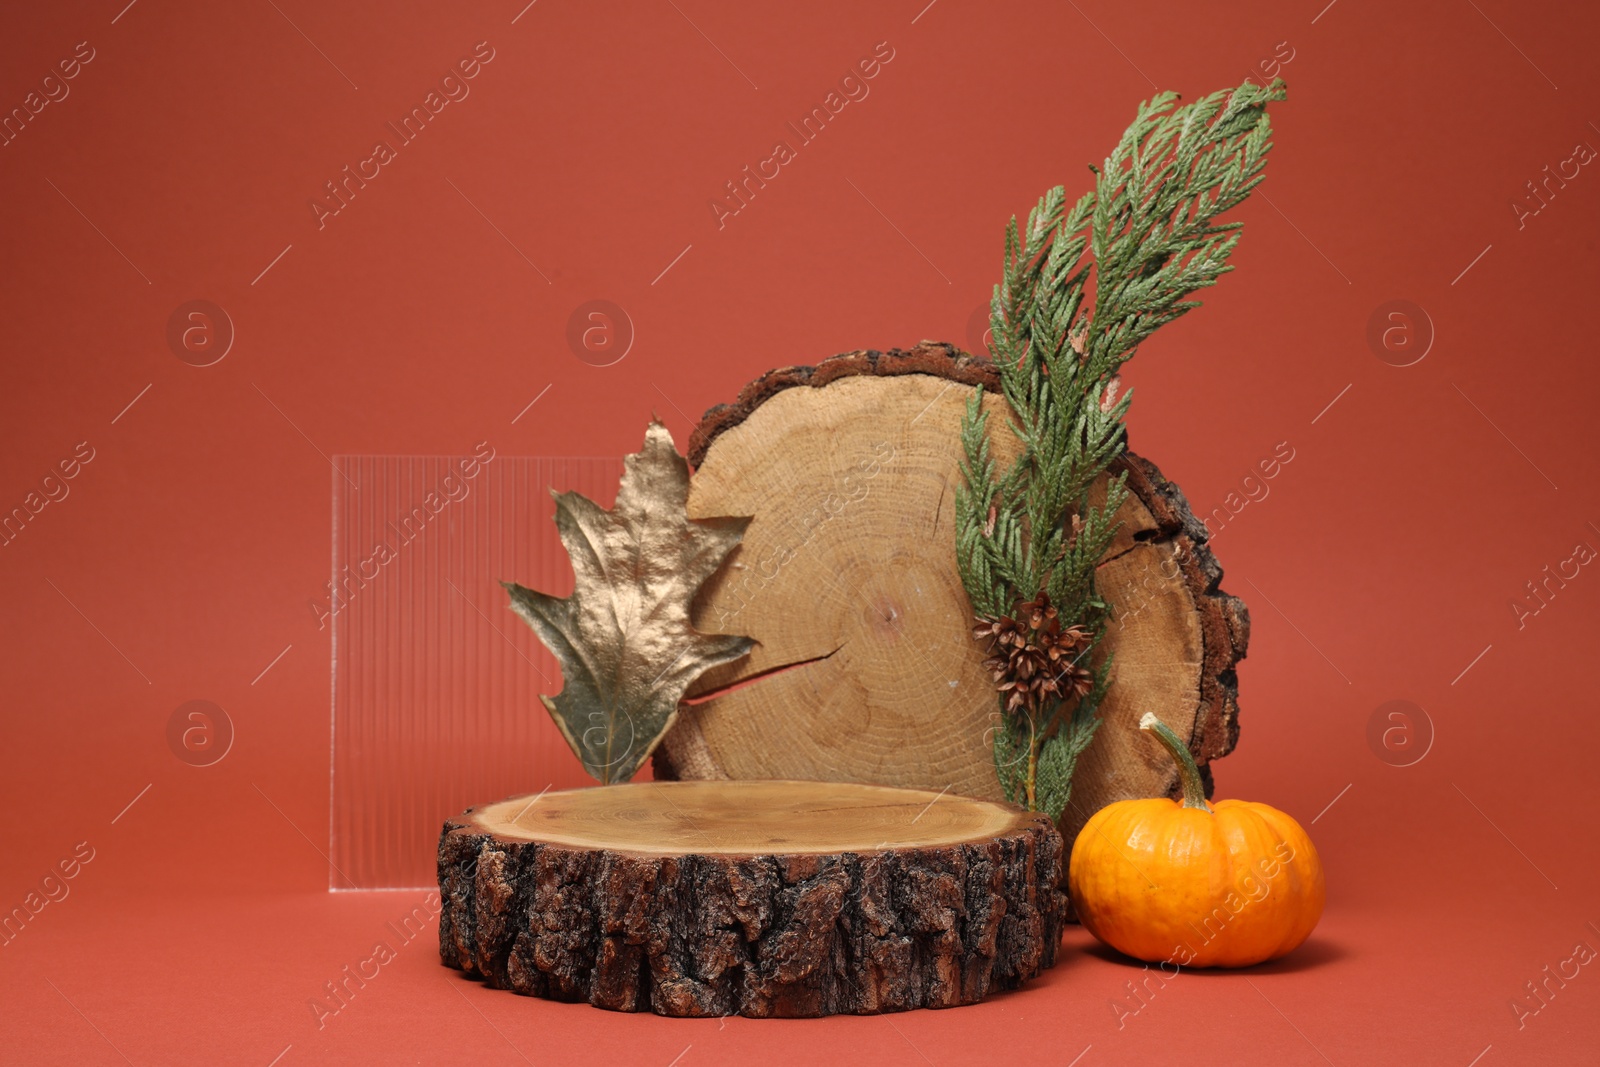 Photo of Stylish presentation for product. Wooden stumps, geometric figure and autumn decor on terracotta background